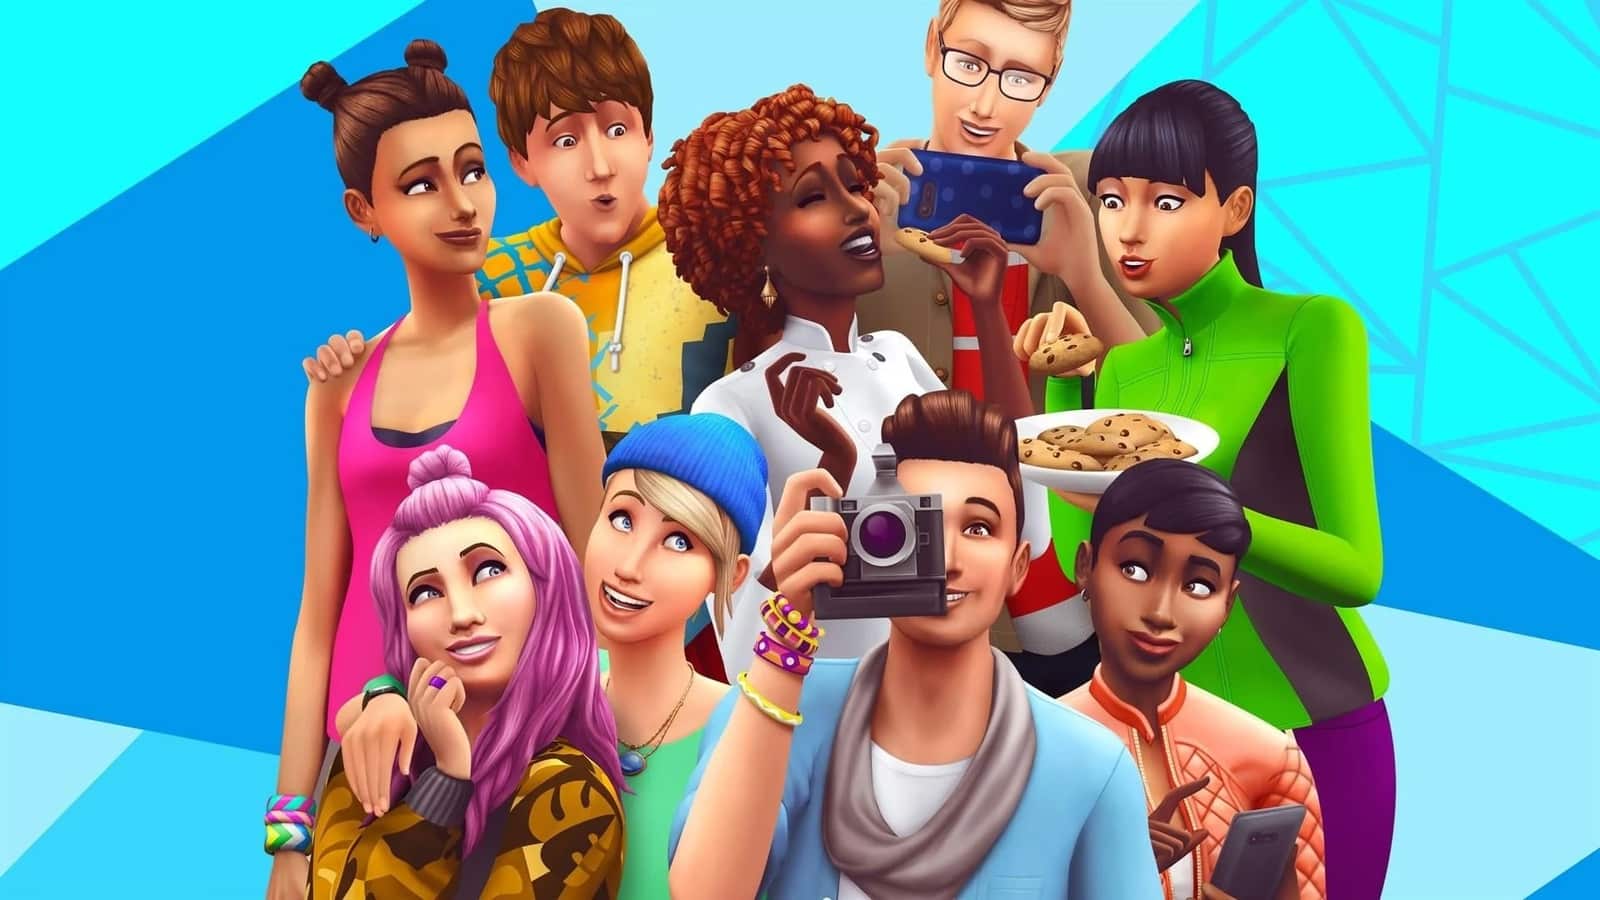 How to use the Debug Cheat to show hidden objects in The Sims 4